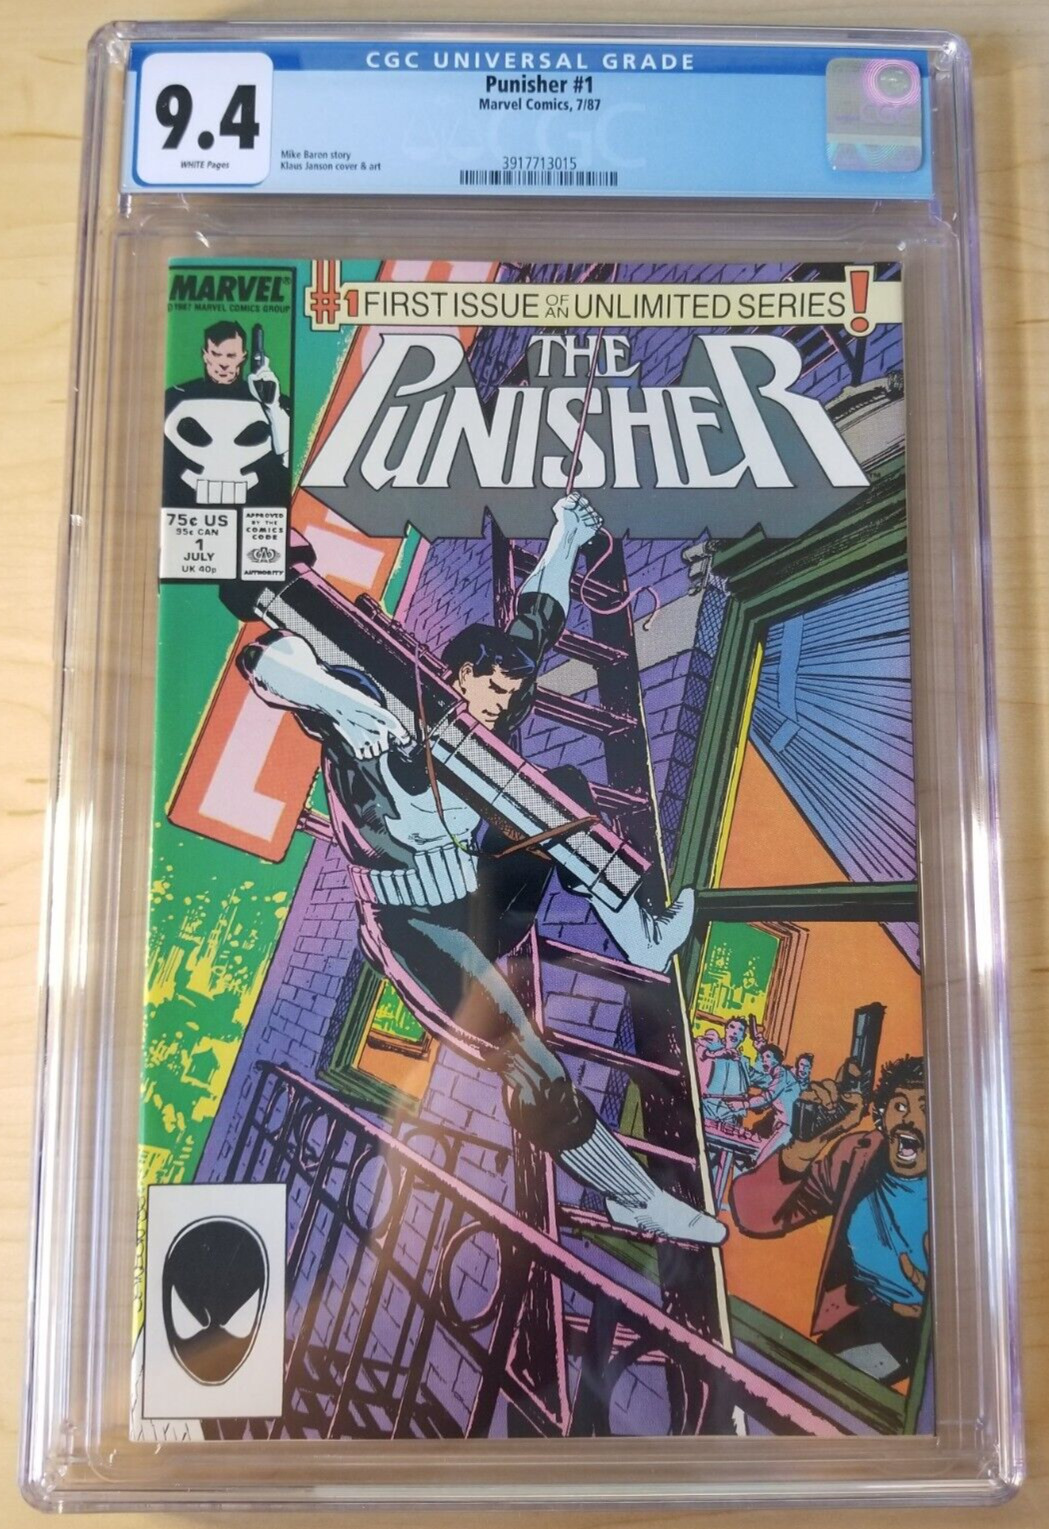 The Punisher issue #1 - CGC 9.4 (1987, Marvel Comics) 1st ongoing series